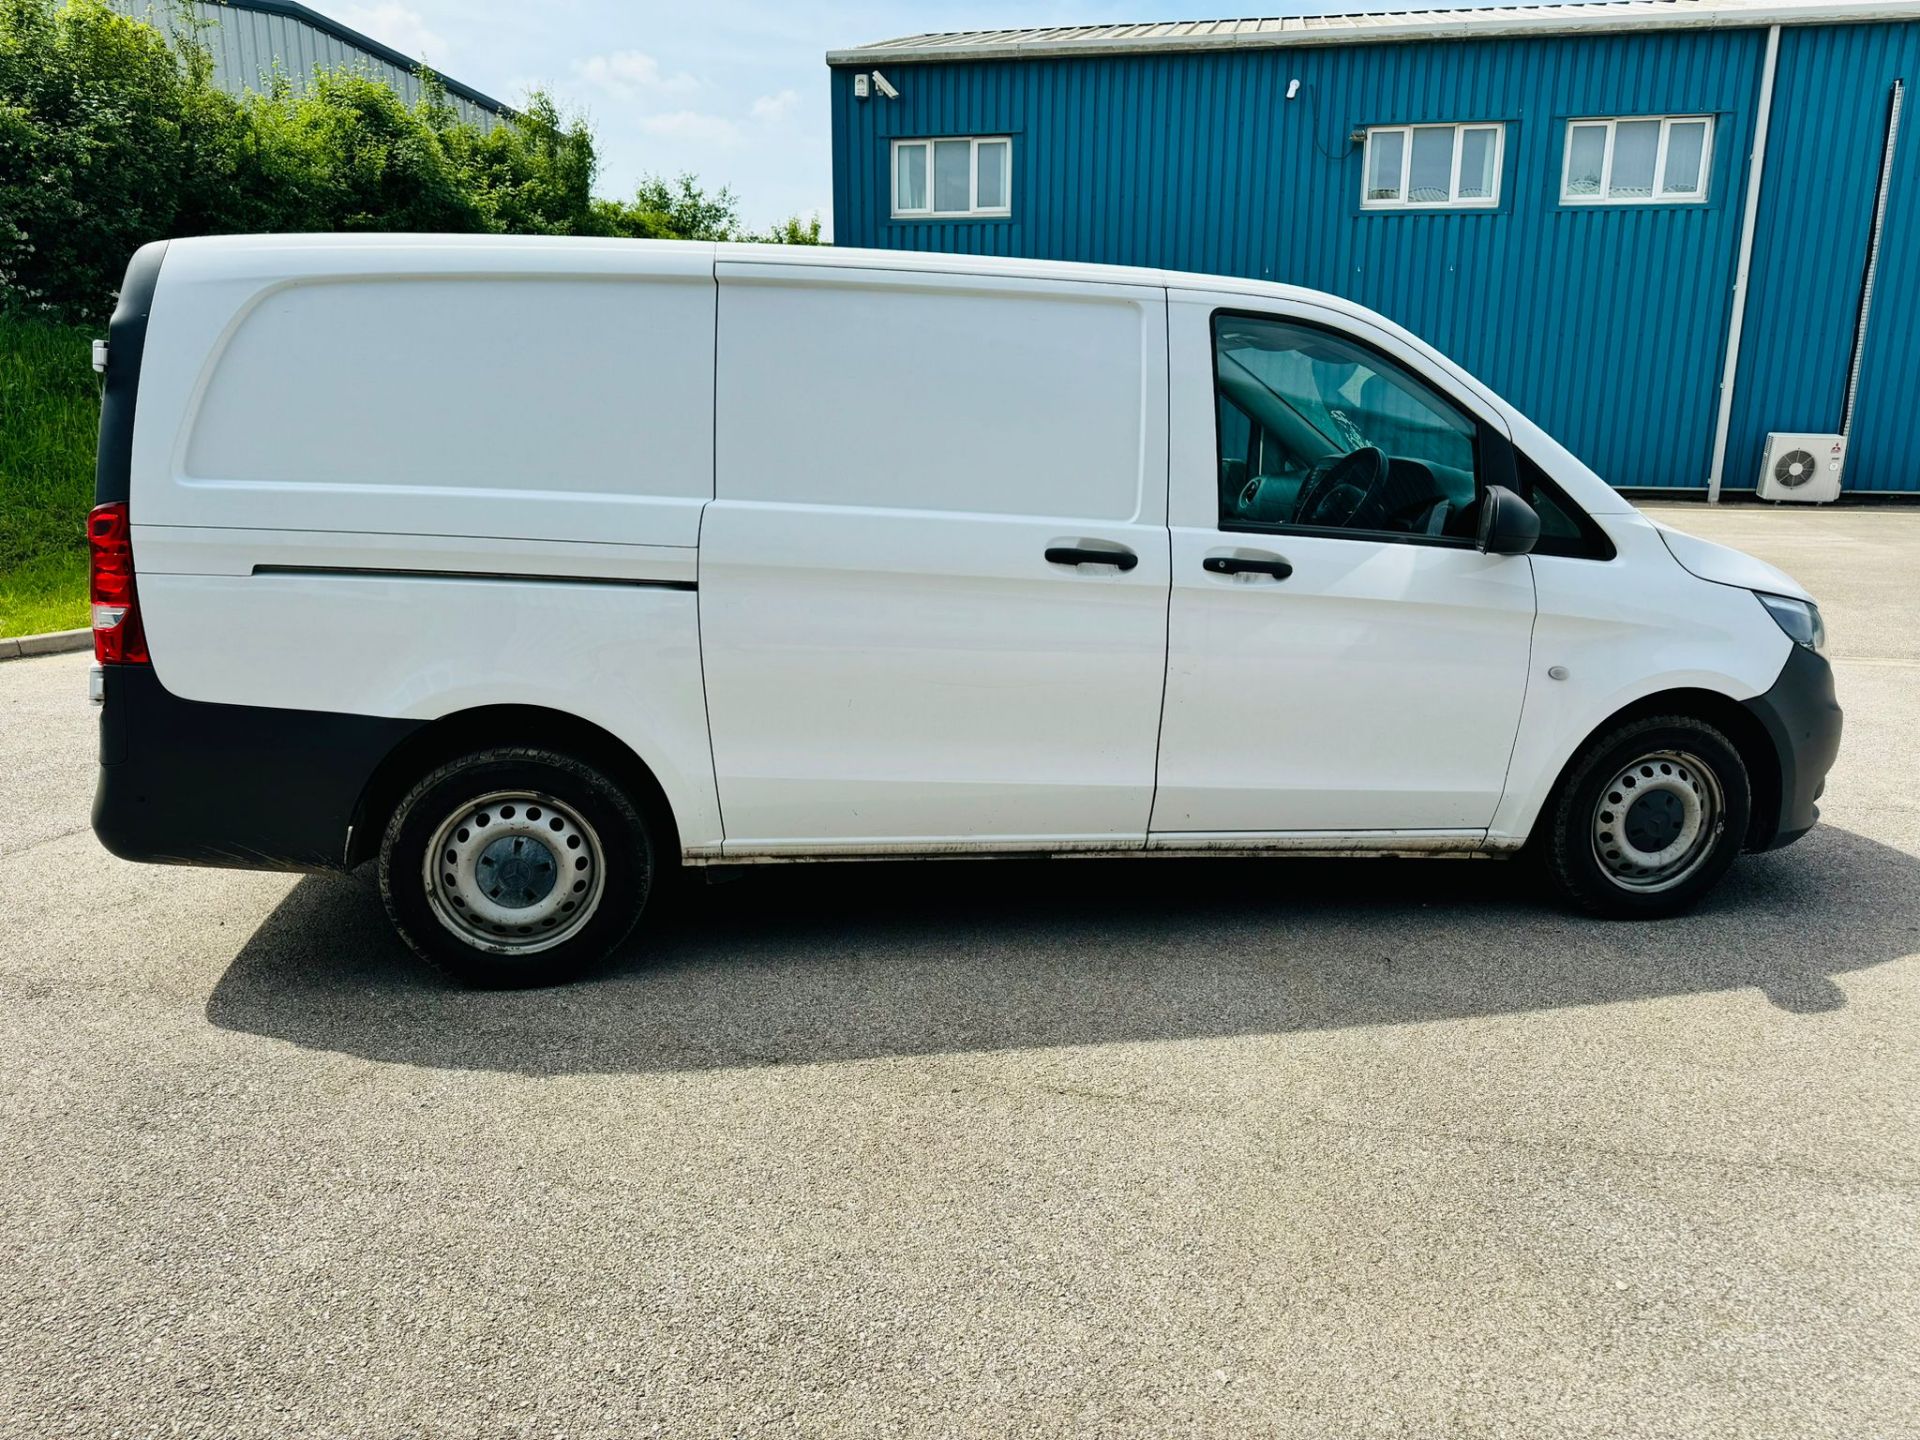 MERCEDES BENZ VITO CDI PURE - 2020 20 Reg - Only 74k Miles - 1 Owner From New - Parking Sensors - Image 2 of 21